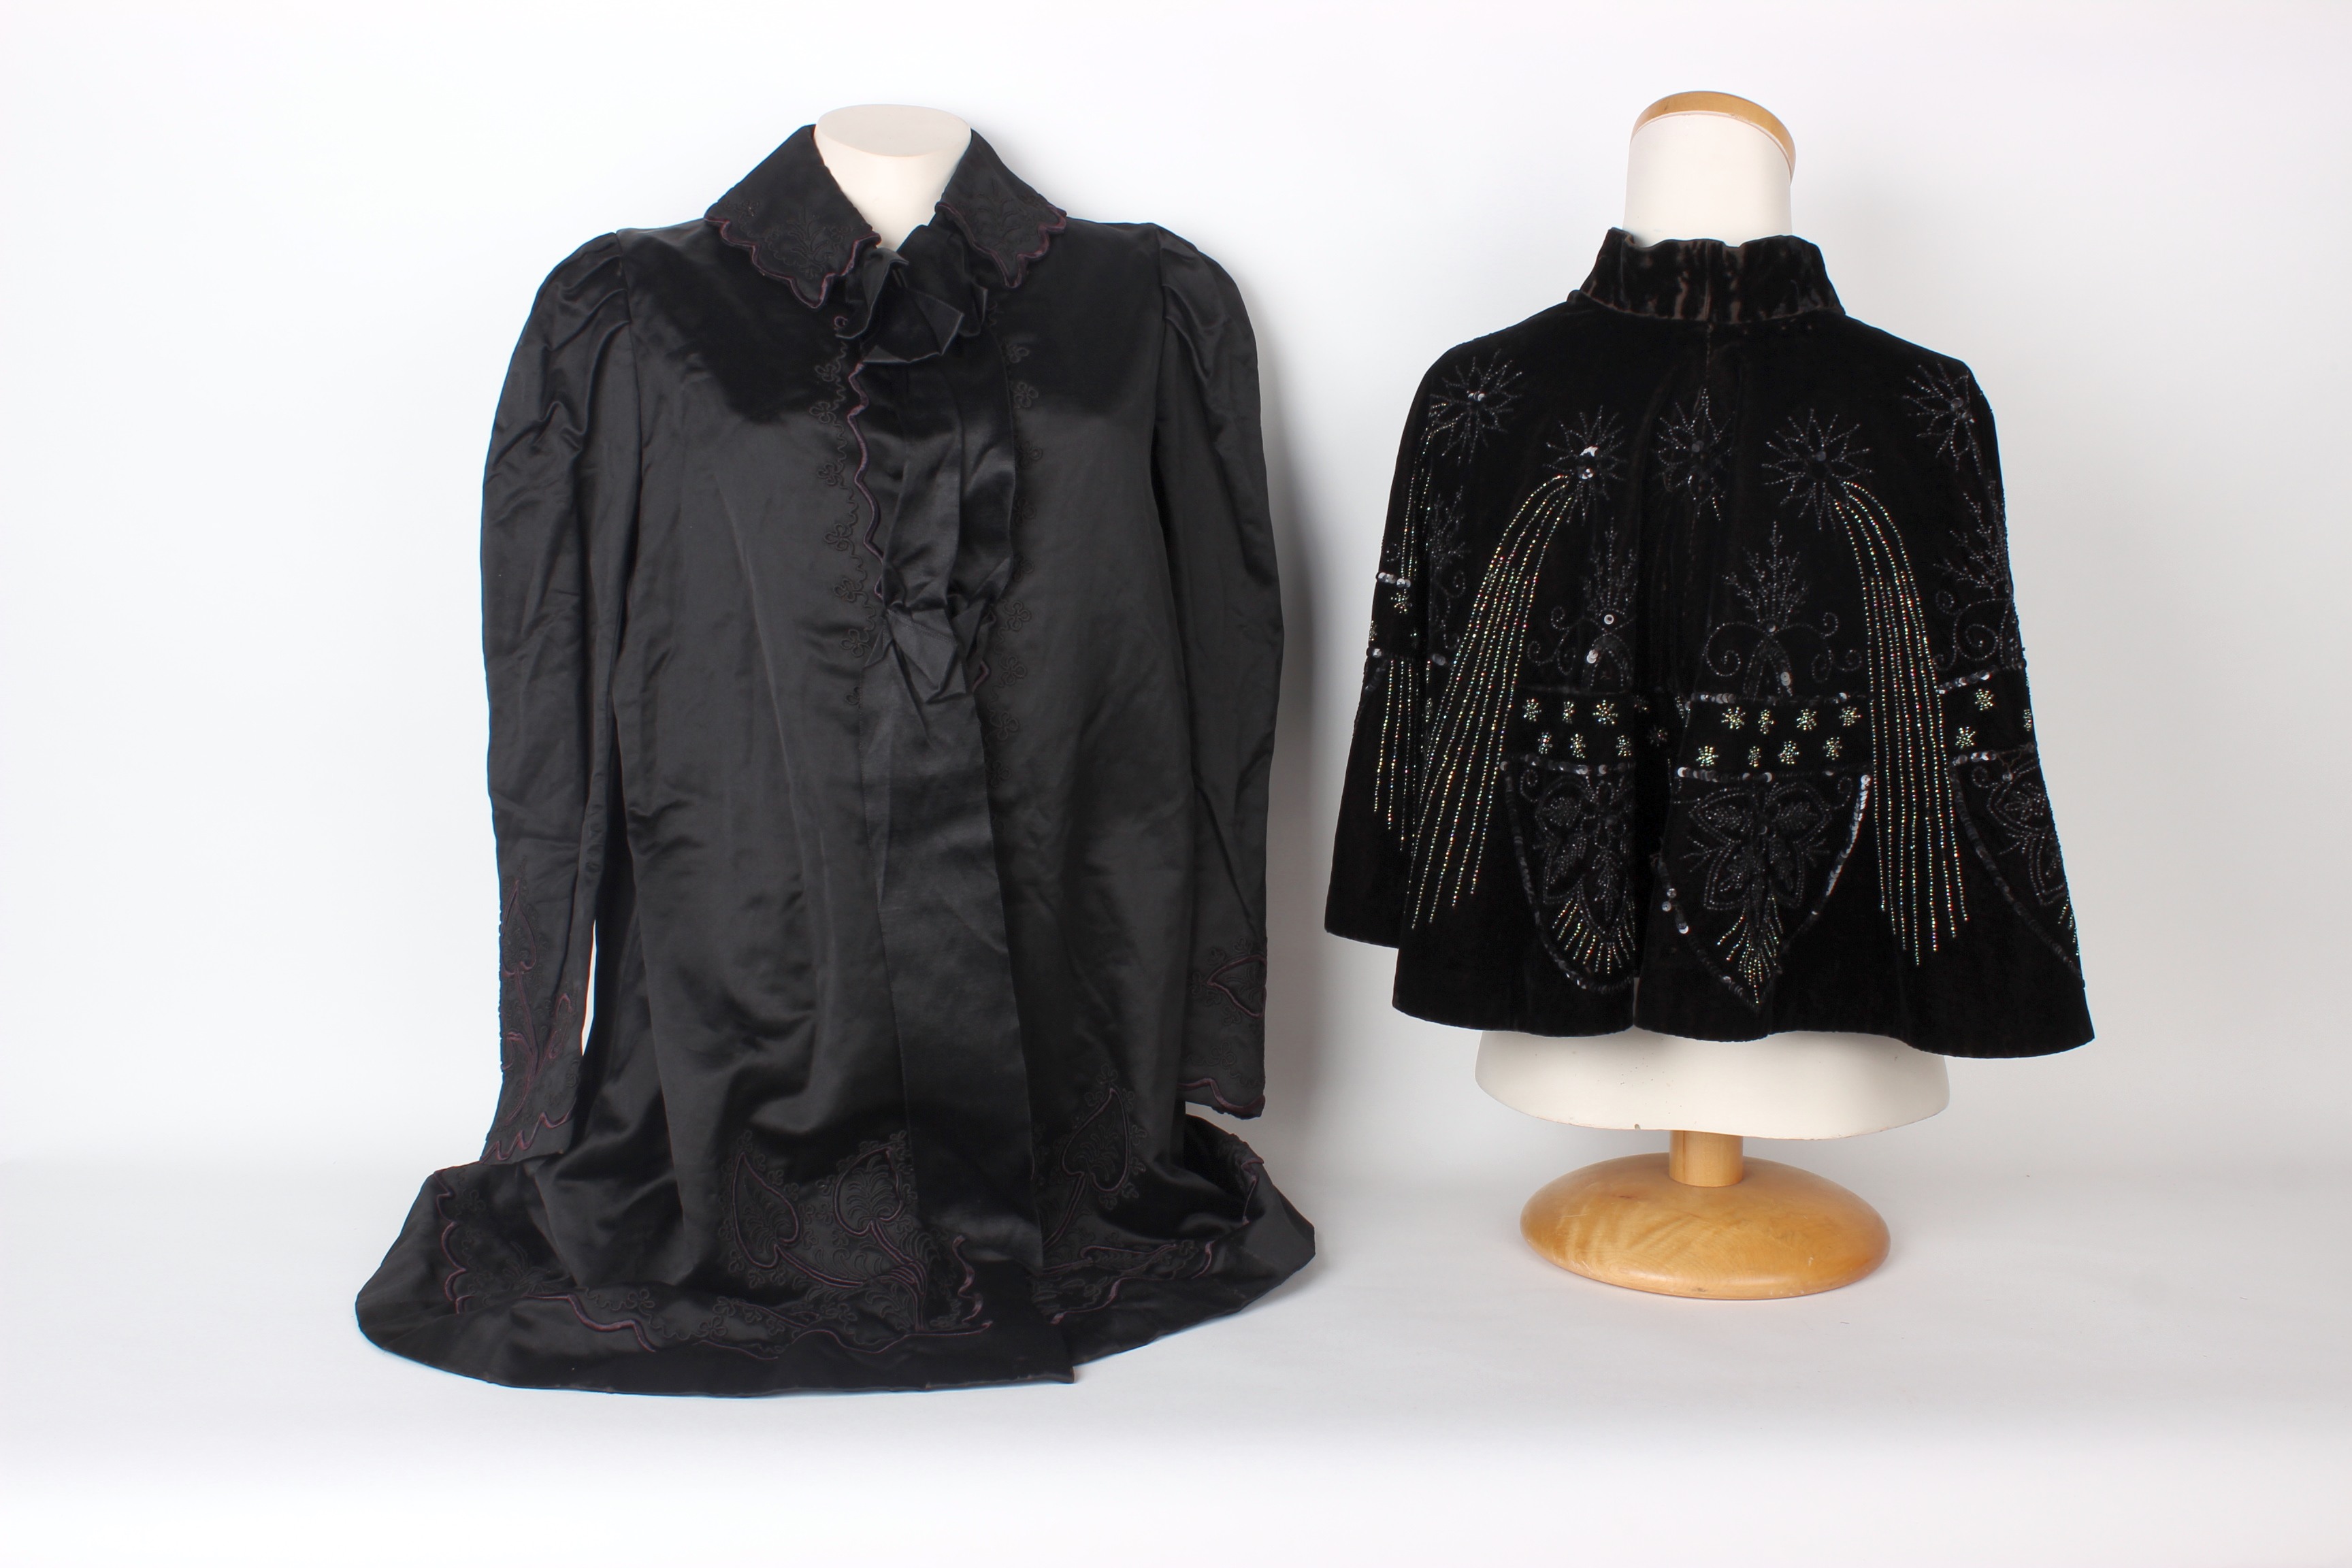 A late 19th Century black grosgrain jacket, a black satin Victorian jacket embellished with